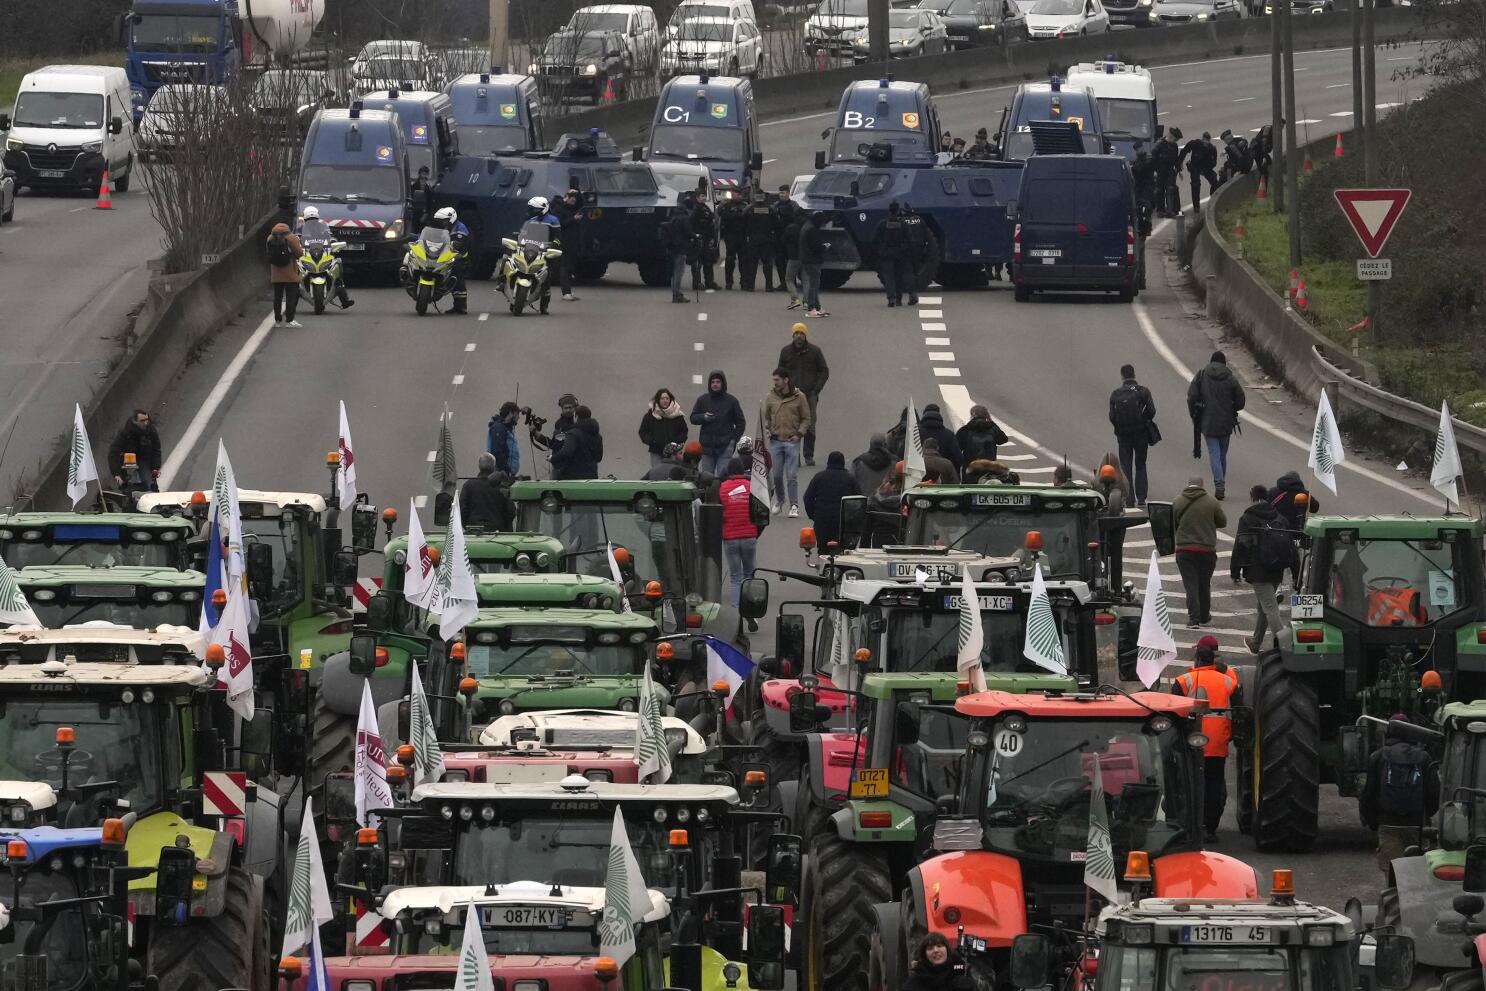 Barricaded Highways and a Deadly Incident as French Farmers Rise